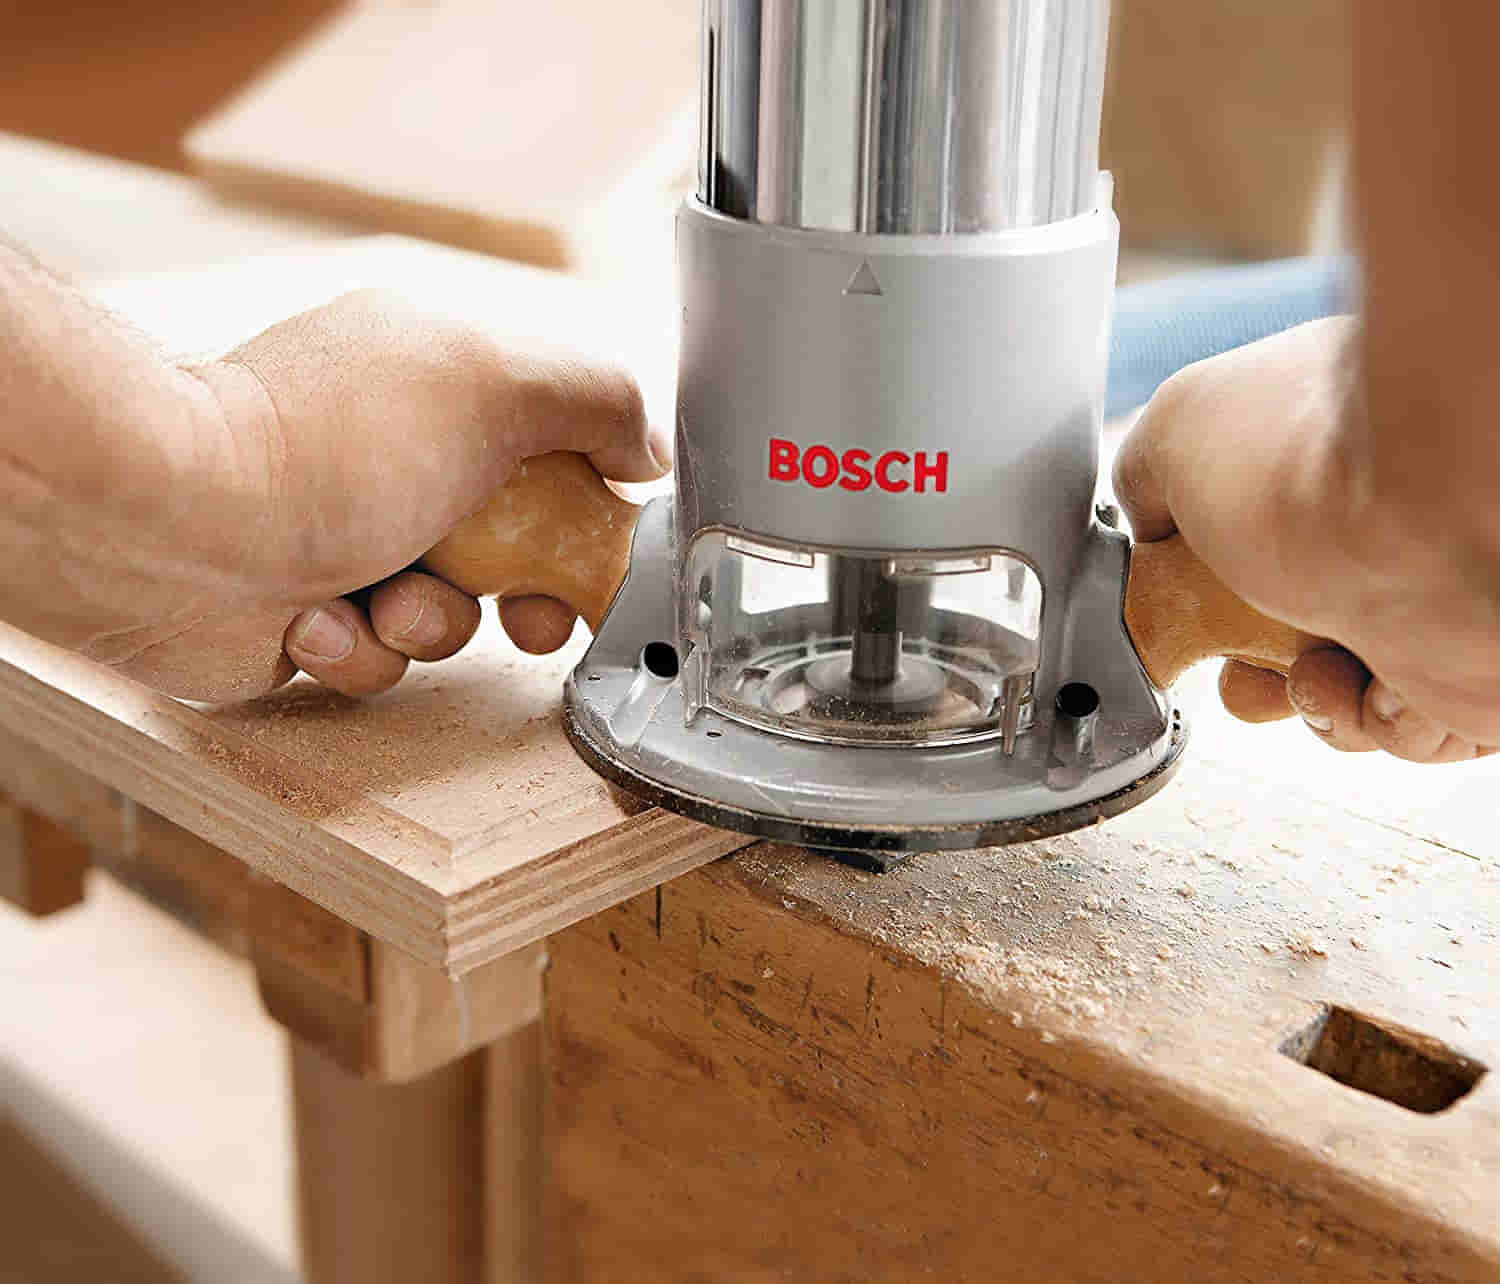 bosch router as domino wood joiner